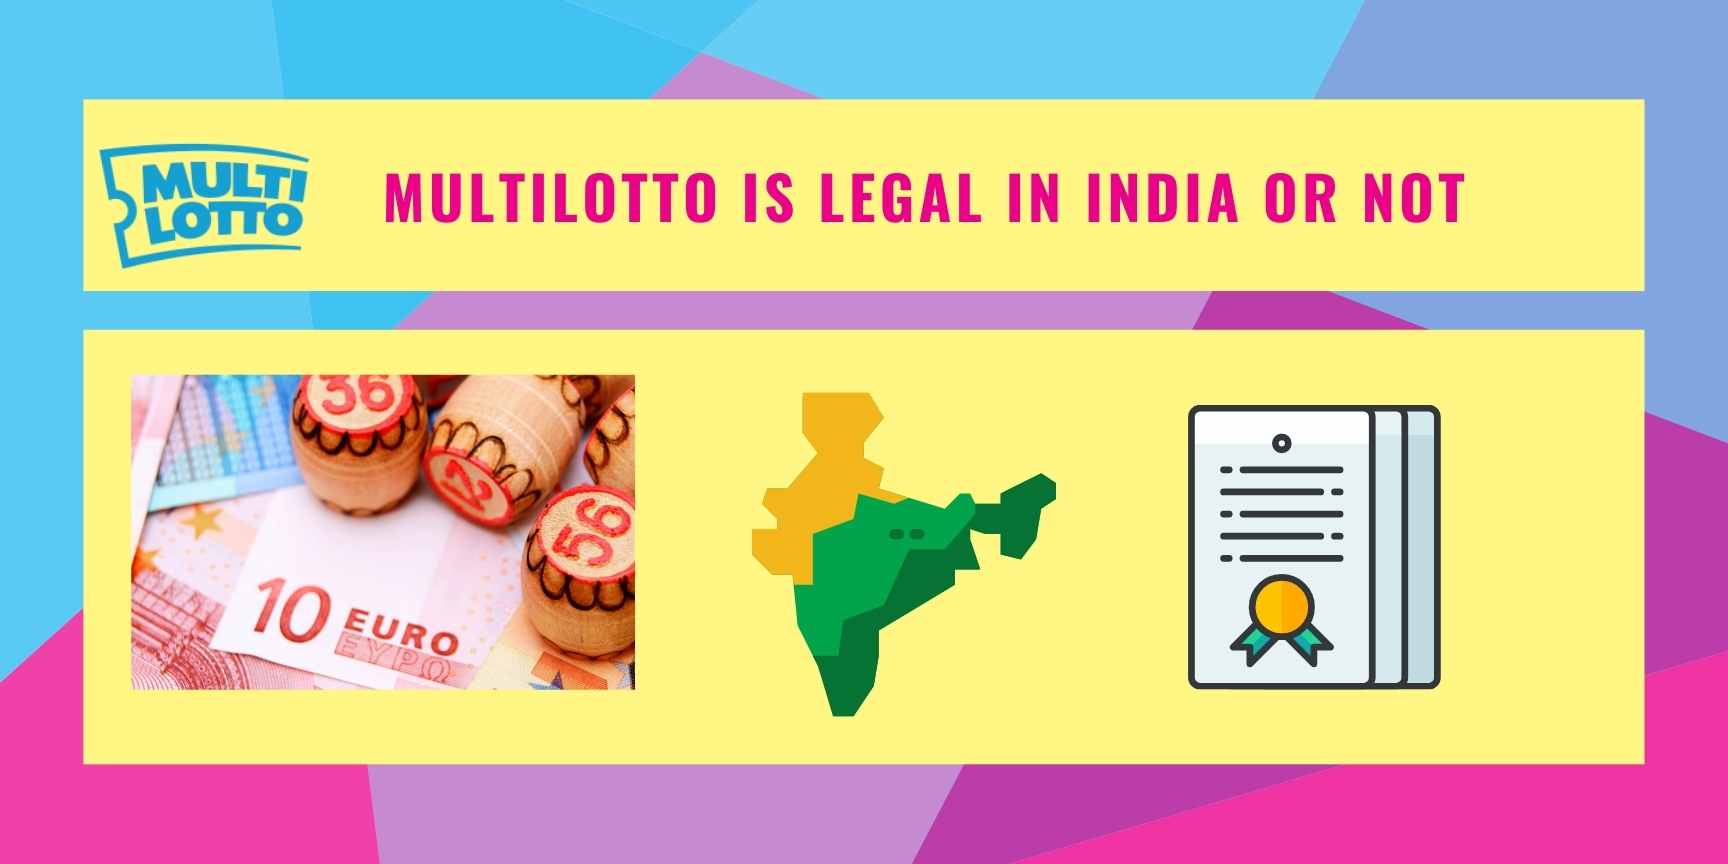 is multilotto legal in India?